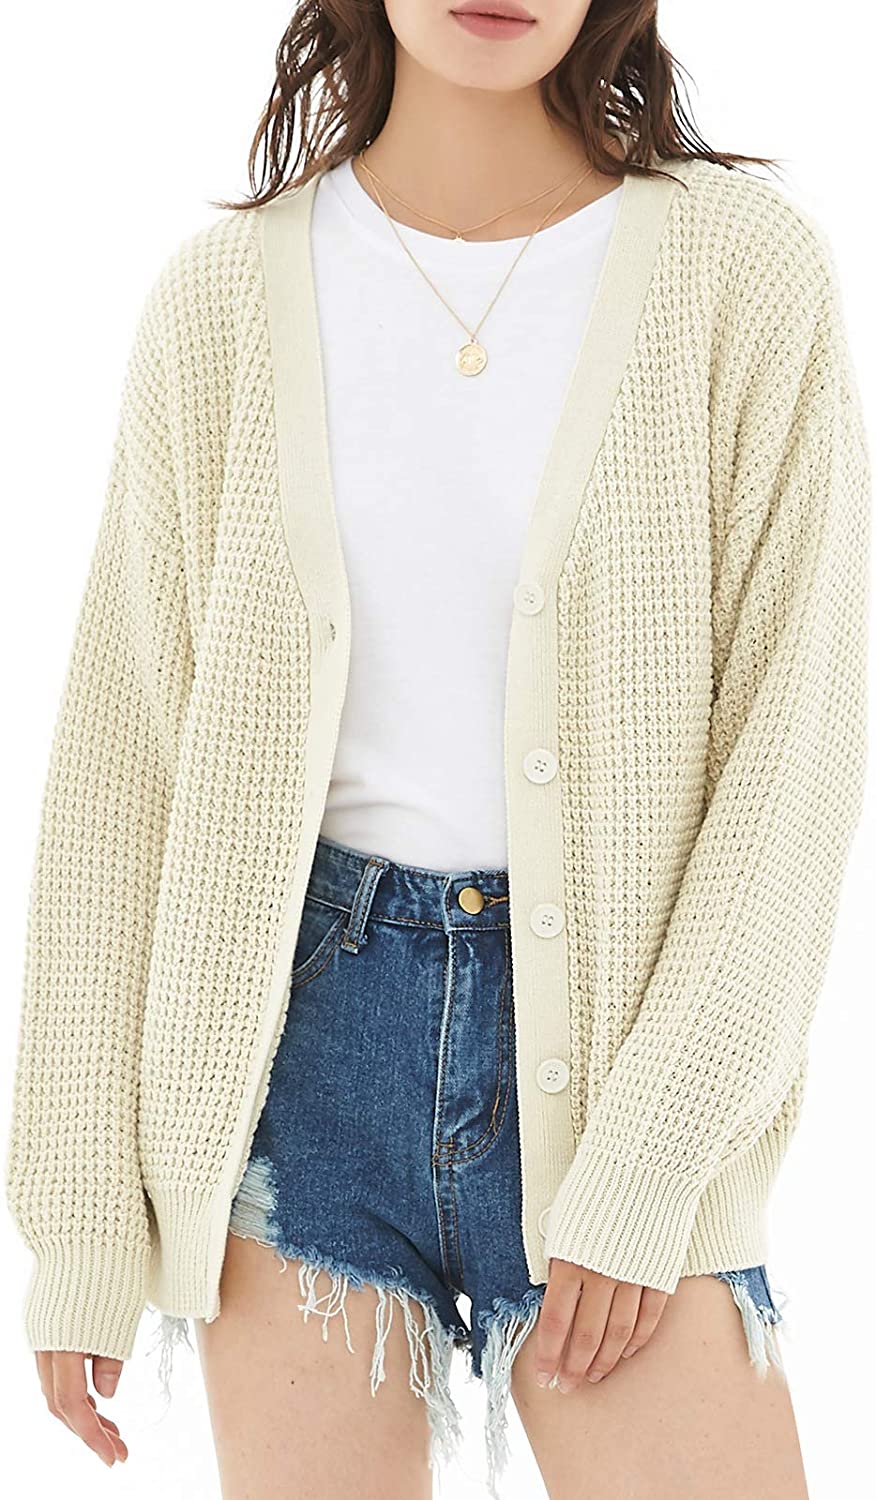 QUALFORT Womens Cardigan Sweater 100% Cotton Button-Down Long Sleeve Oversized Knit Cardigans